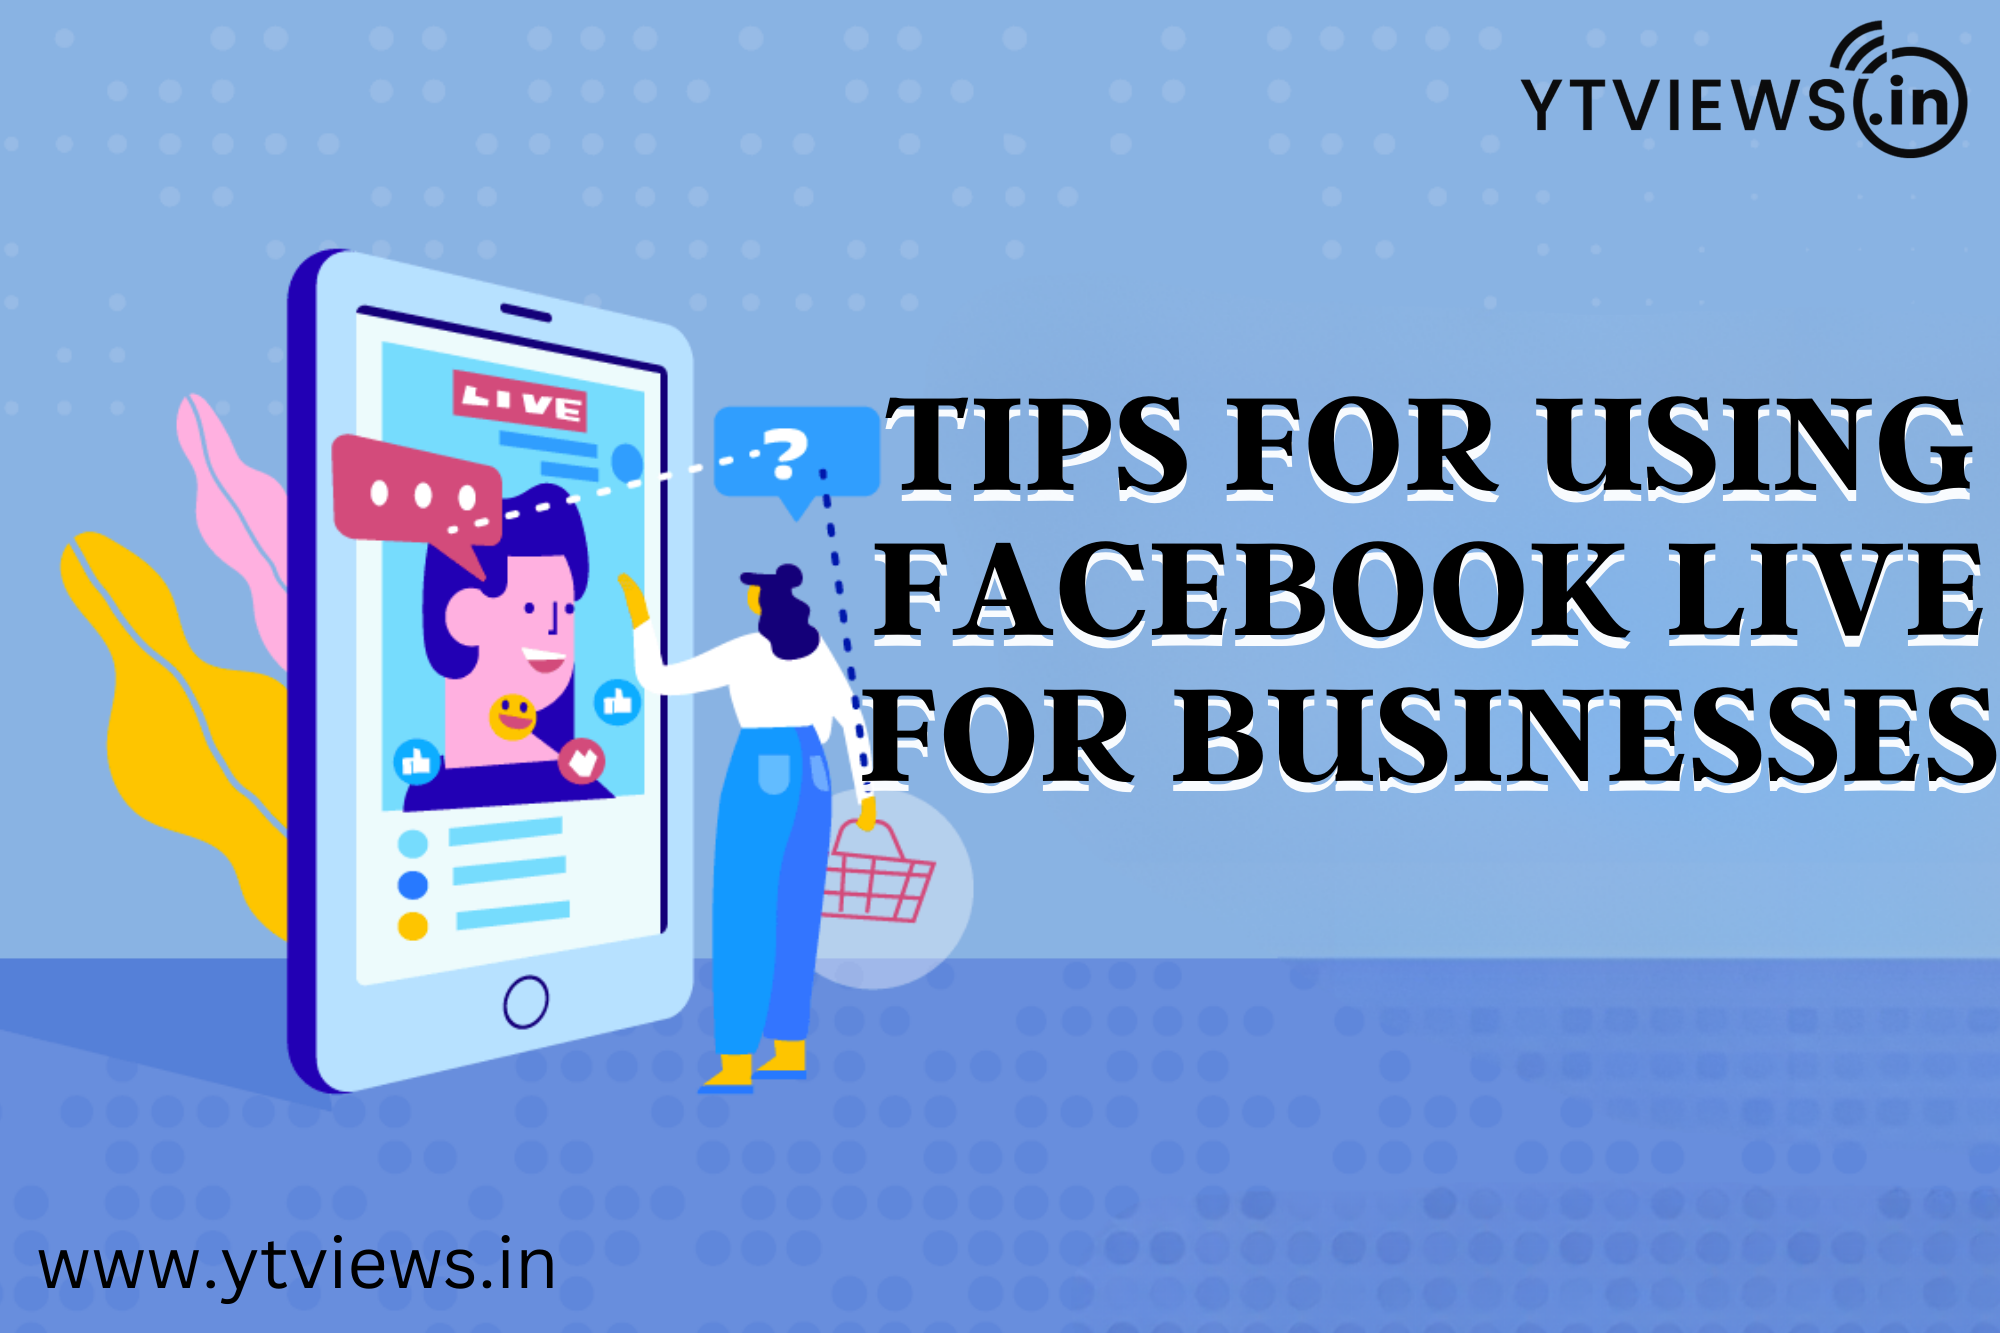 Tips for using Facebook Live for businesses